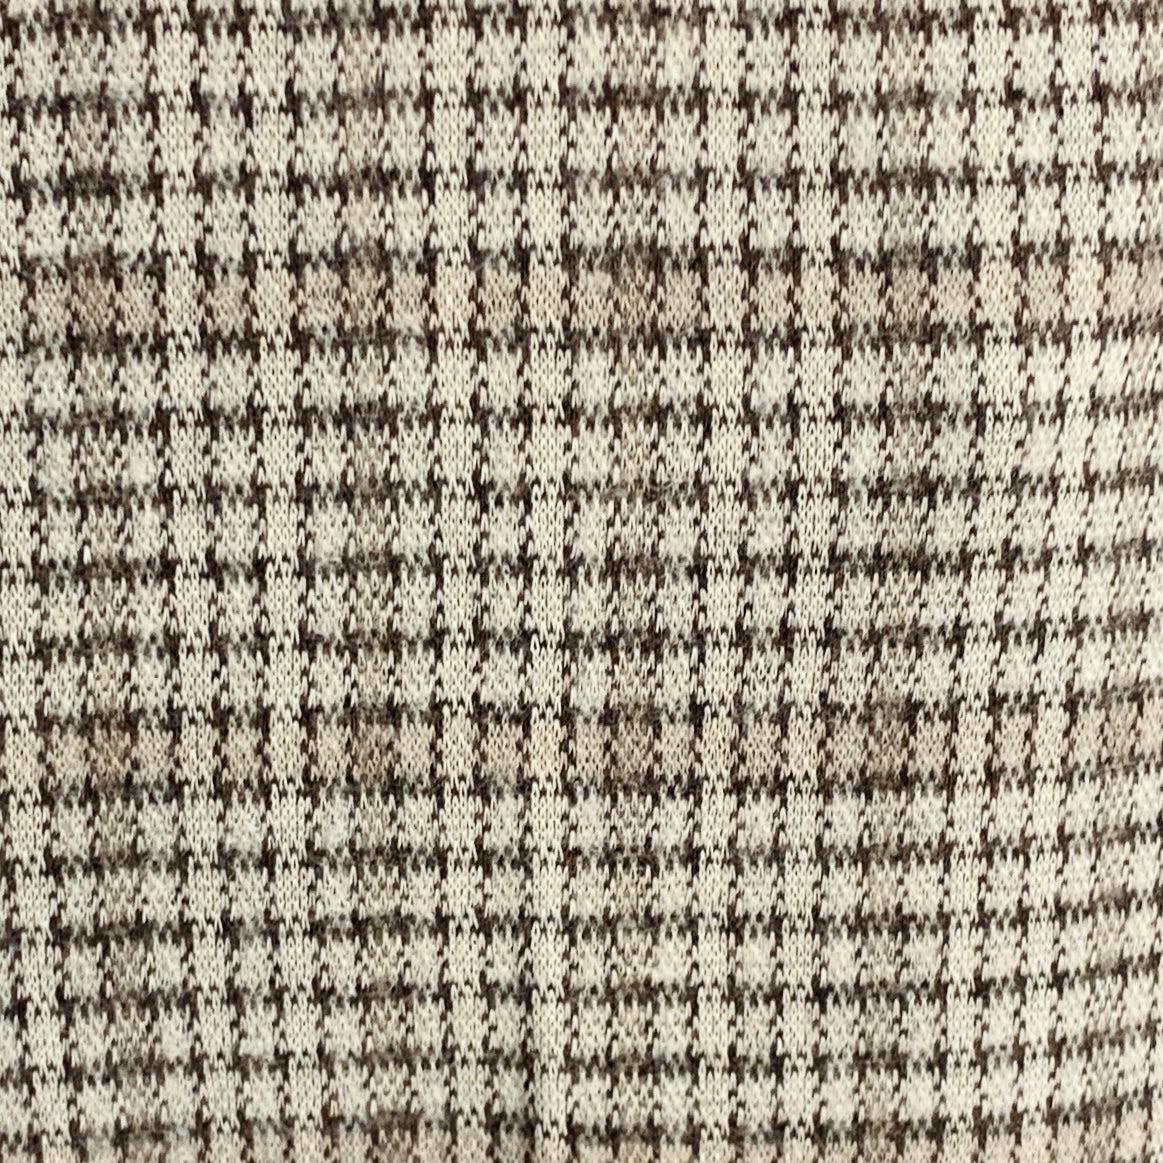 ETRO dress pants
in a
grey and taupe cotton wool blend fabric featuring a houndstooth pattern, flat front style, slim fit, and zip fly cosure. Made in Italy.
This item features an unfinished hem to tailor to your perfect fit! It has also been